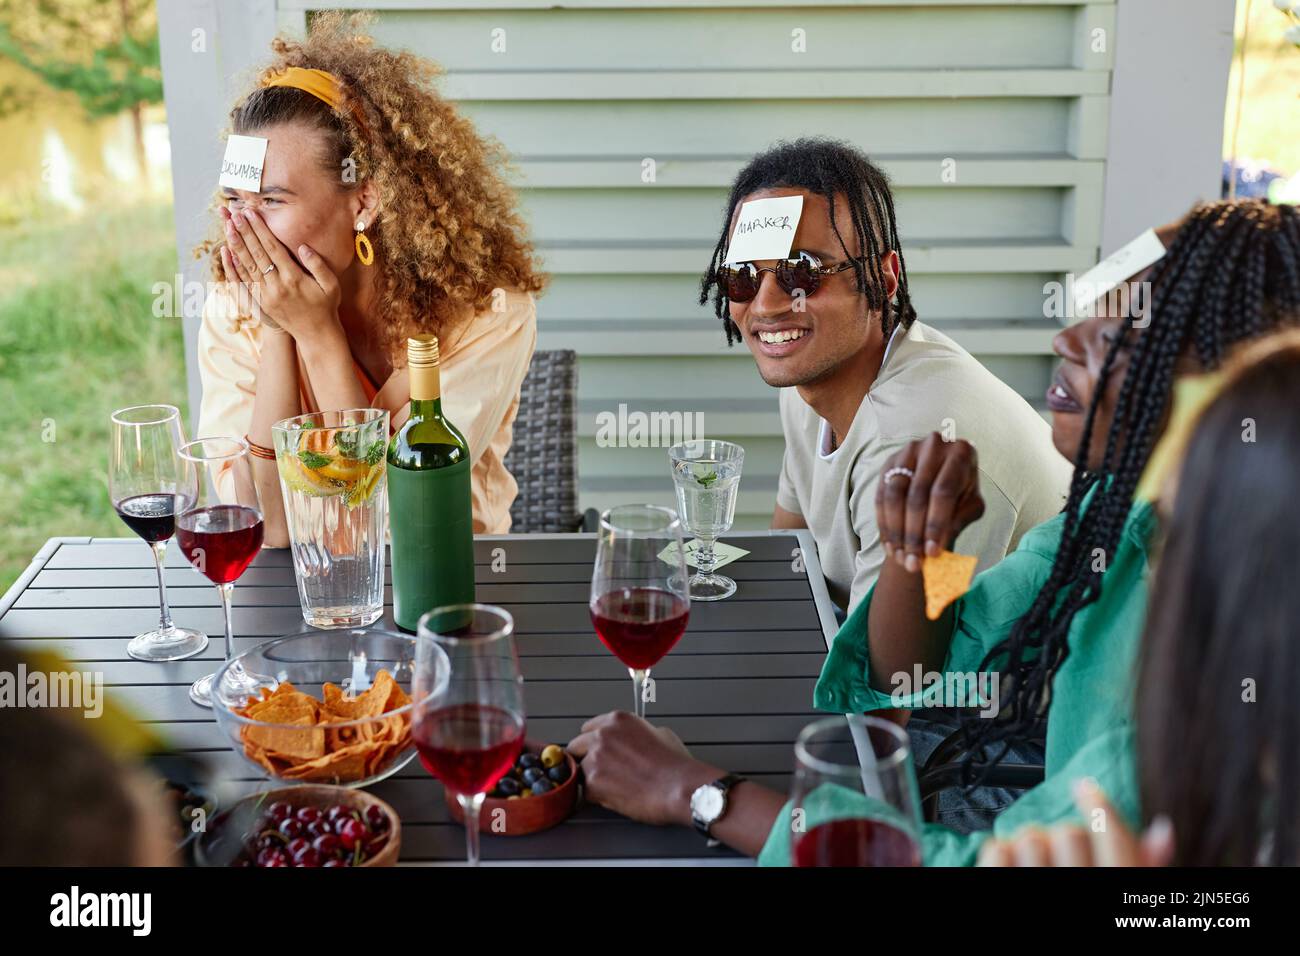 Group of young people laughing and playing Guess who game while sitting at table outdoors in Summer Stock Photo